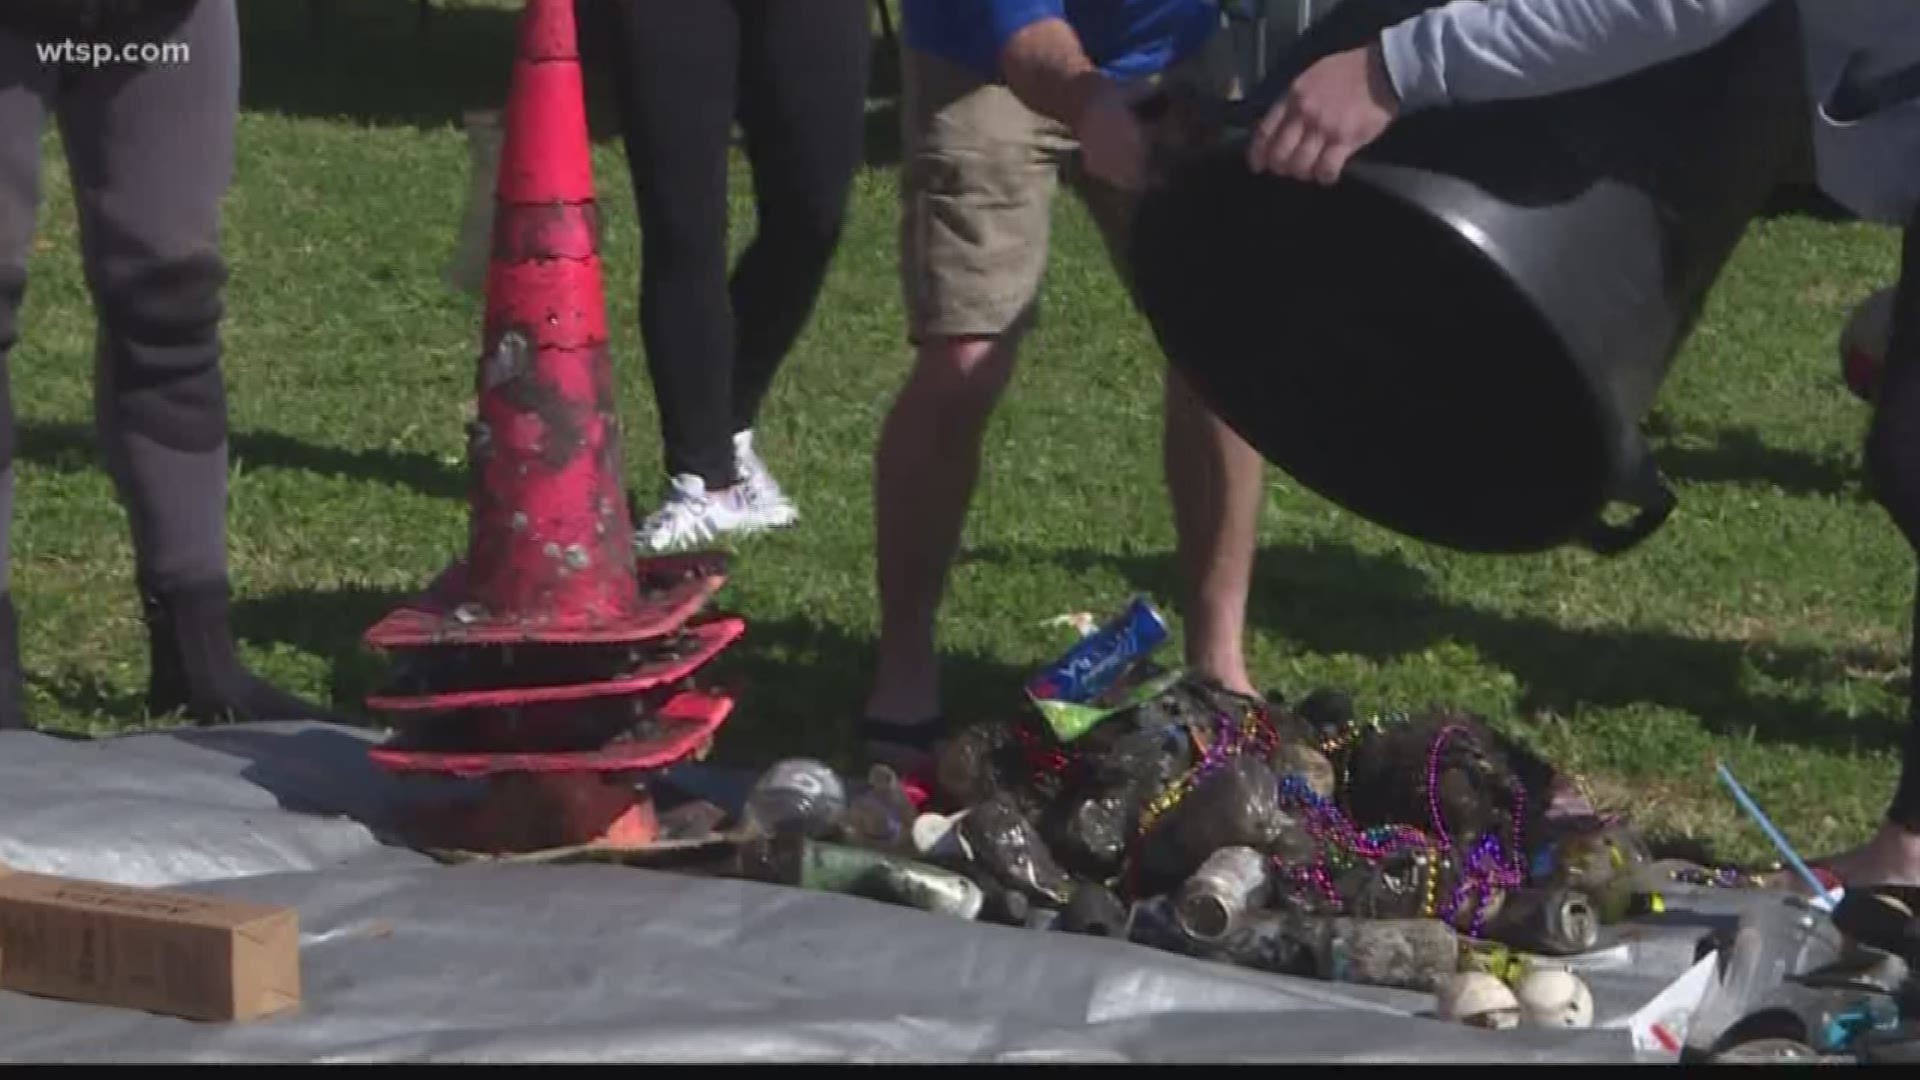 The annual event was held earlier this year in an effort to prevent beads from being swept out further into the Bay.